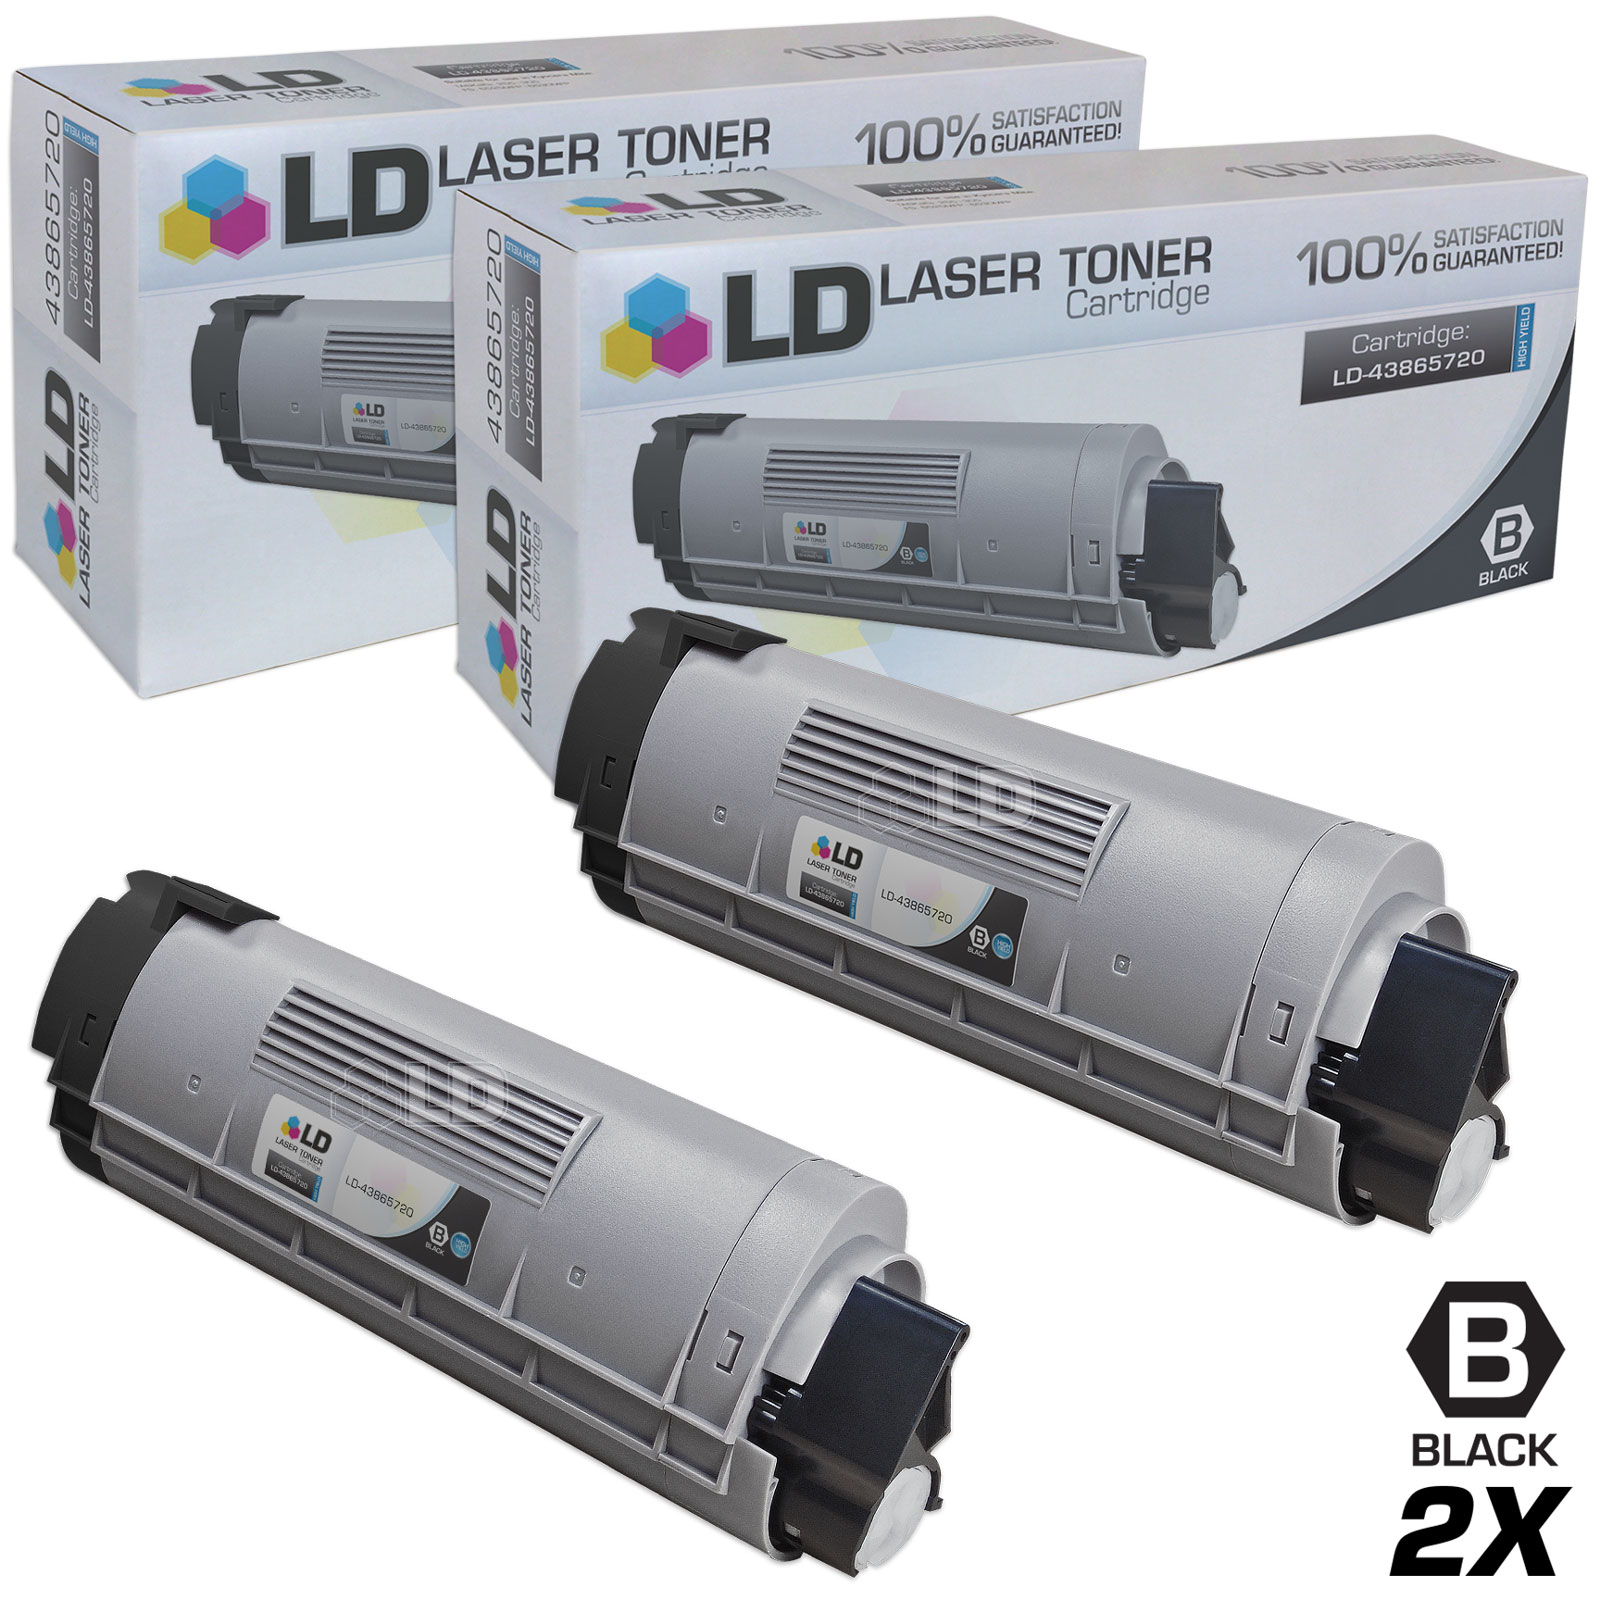 LD Compatible Replacements for Okidata 43865720 Set of 2 High Yield Black Laser Toner Cartridges for use in Okidata OKI C6150dn, C6150dtn, C6150hdn, C6150n, and MC560 MFP s - image 1 of 1